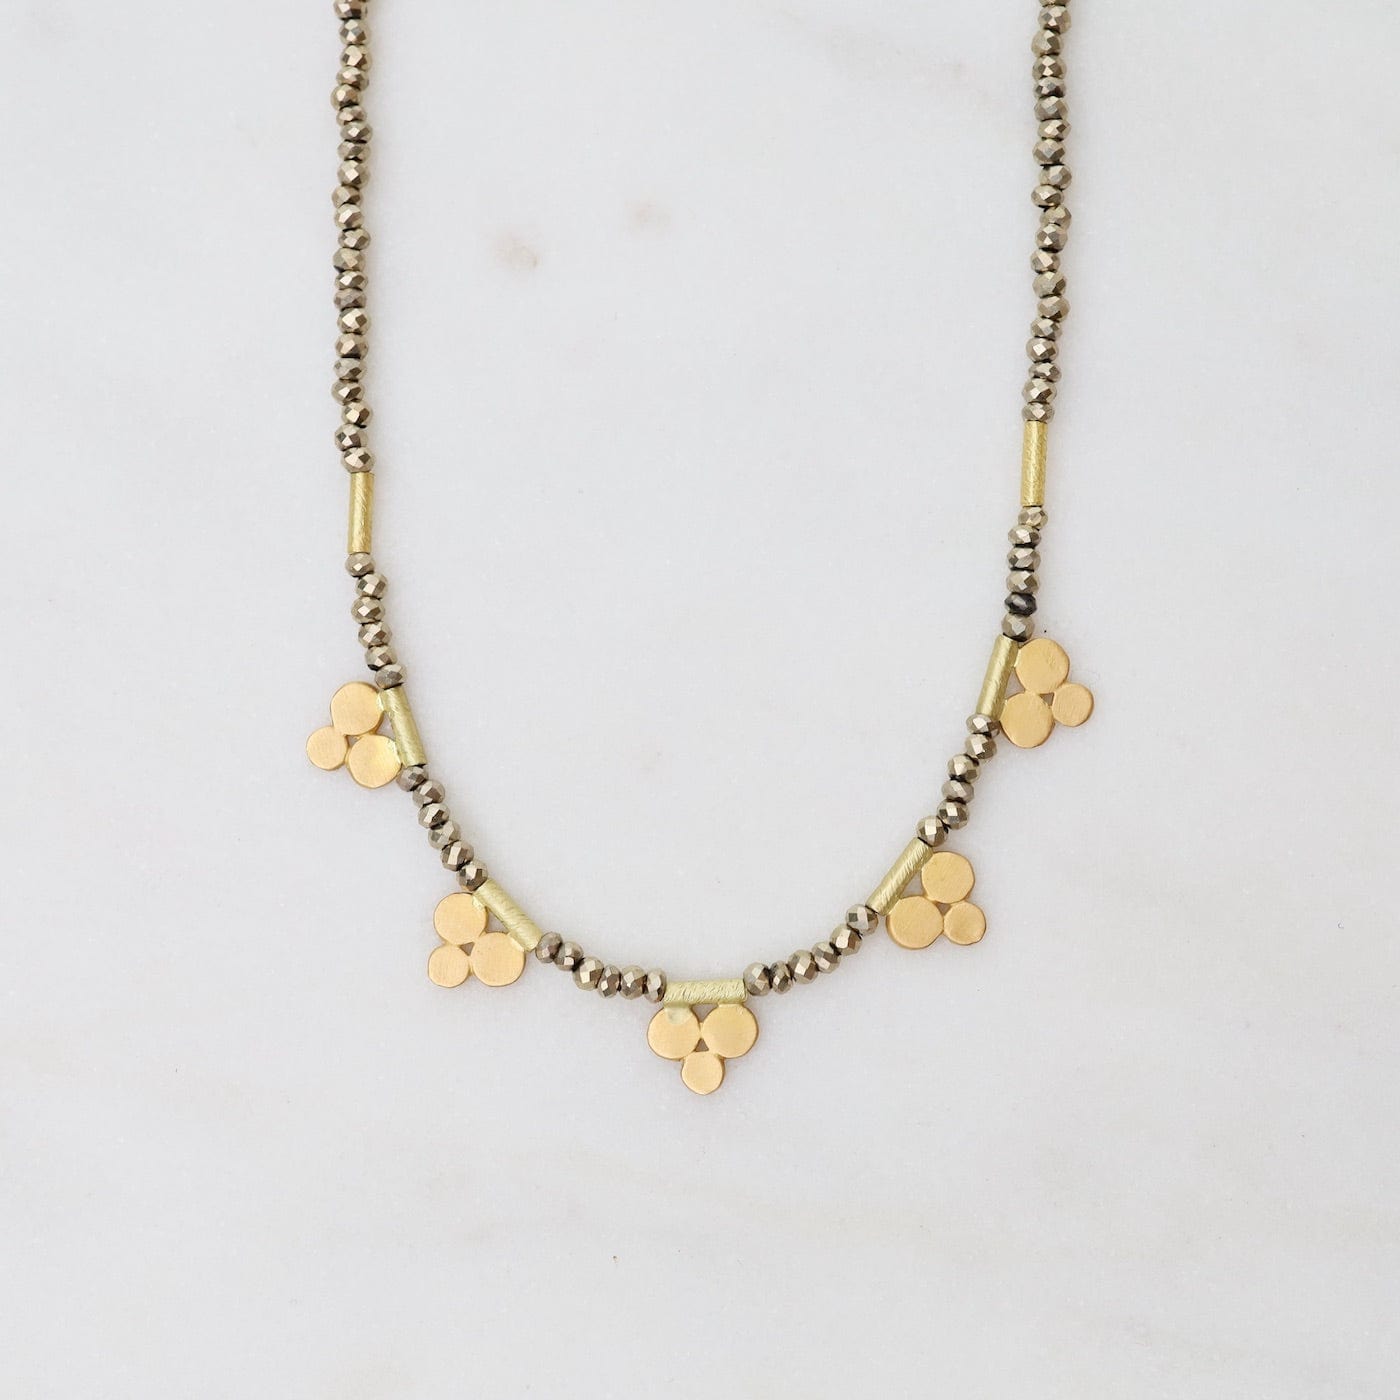 NKL-22K Pyrite Bead Necklace with Five 22k Trios